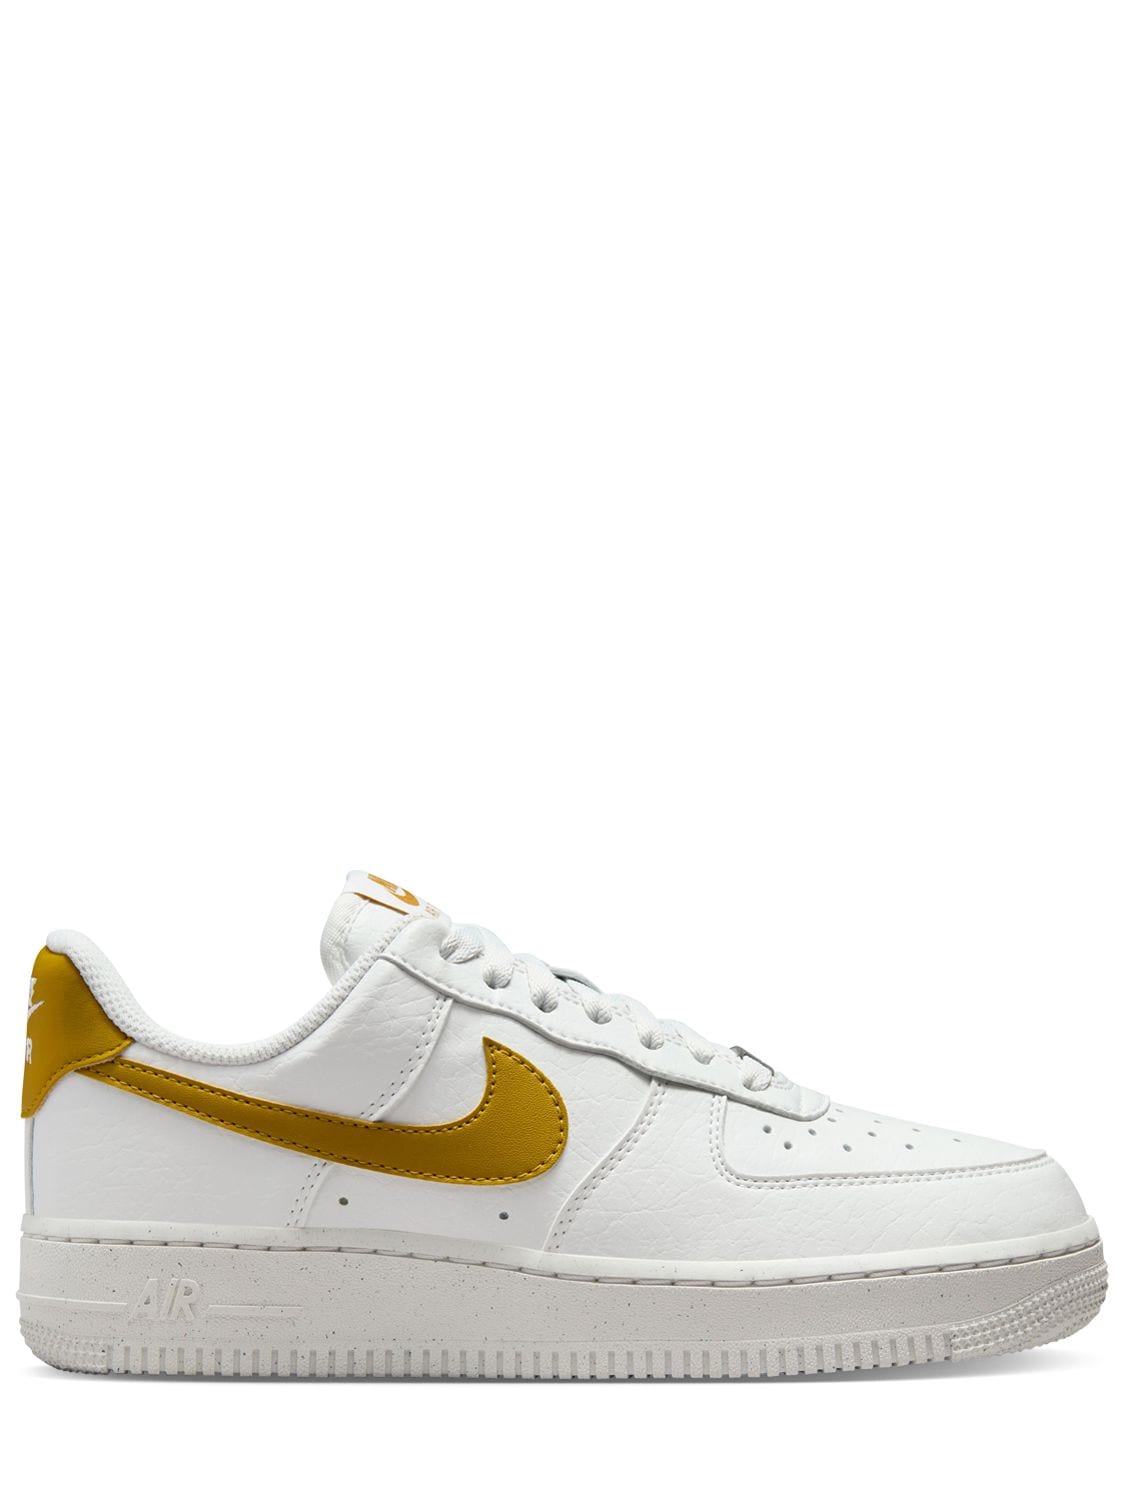 NIKE AIR FORCE 1 '07 SE trainers